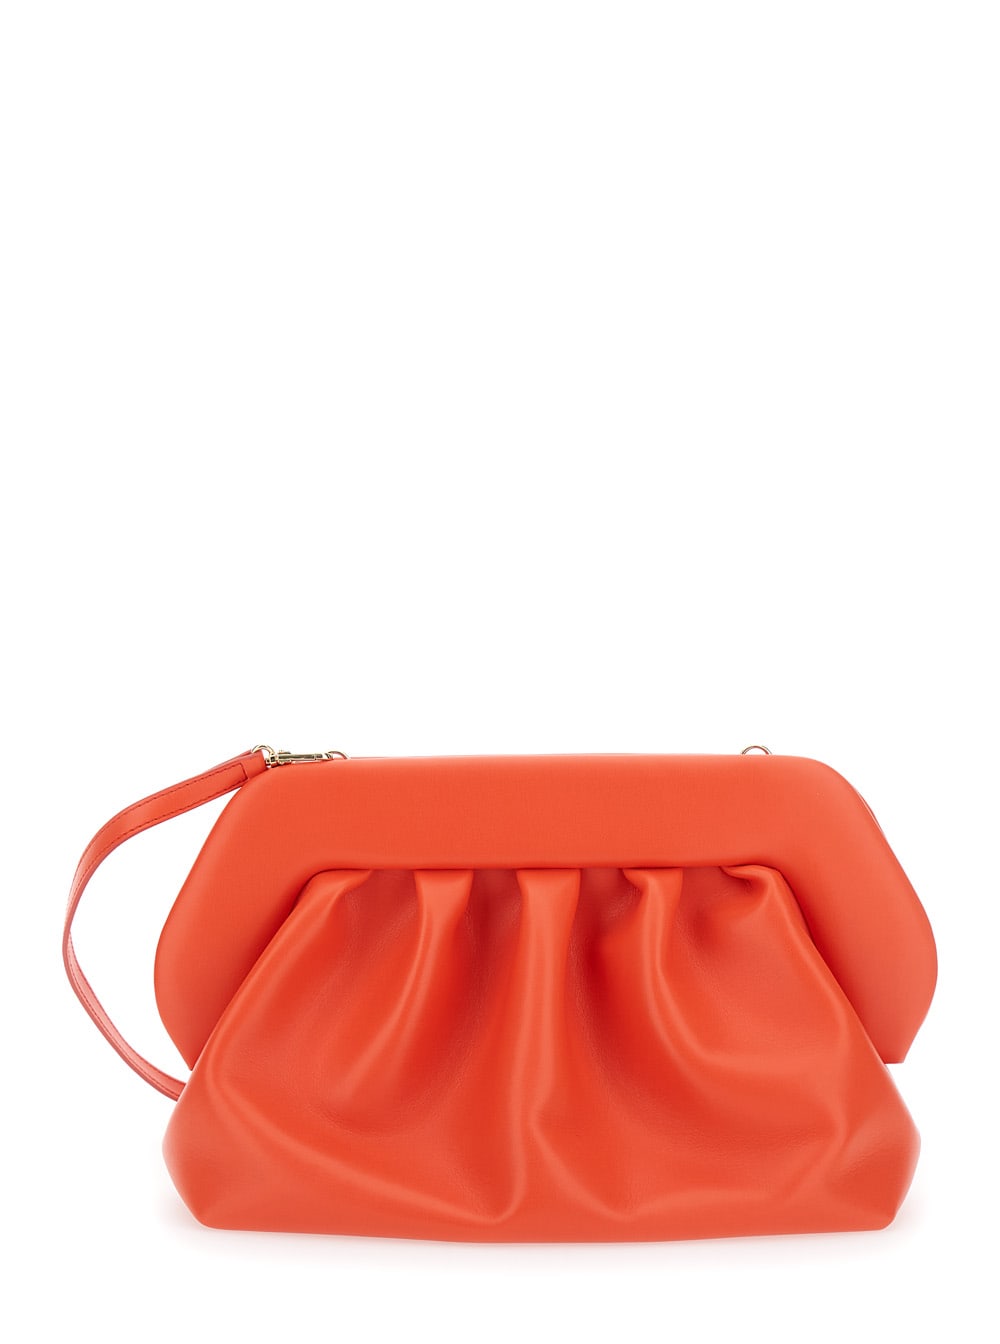 THEMOIRè Orange Clutch Bag With Magnetic Closure In Eco Leather Woman